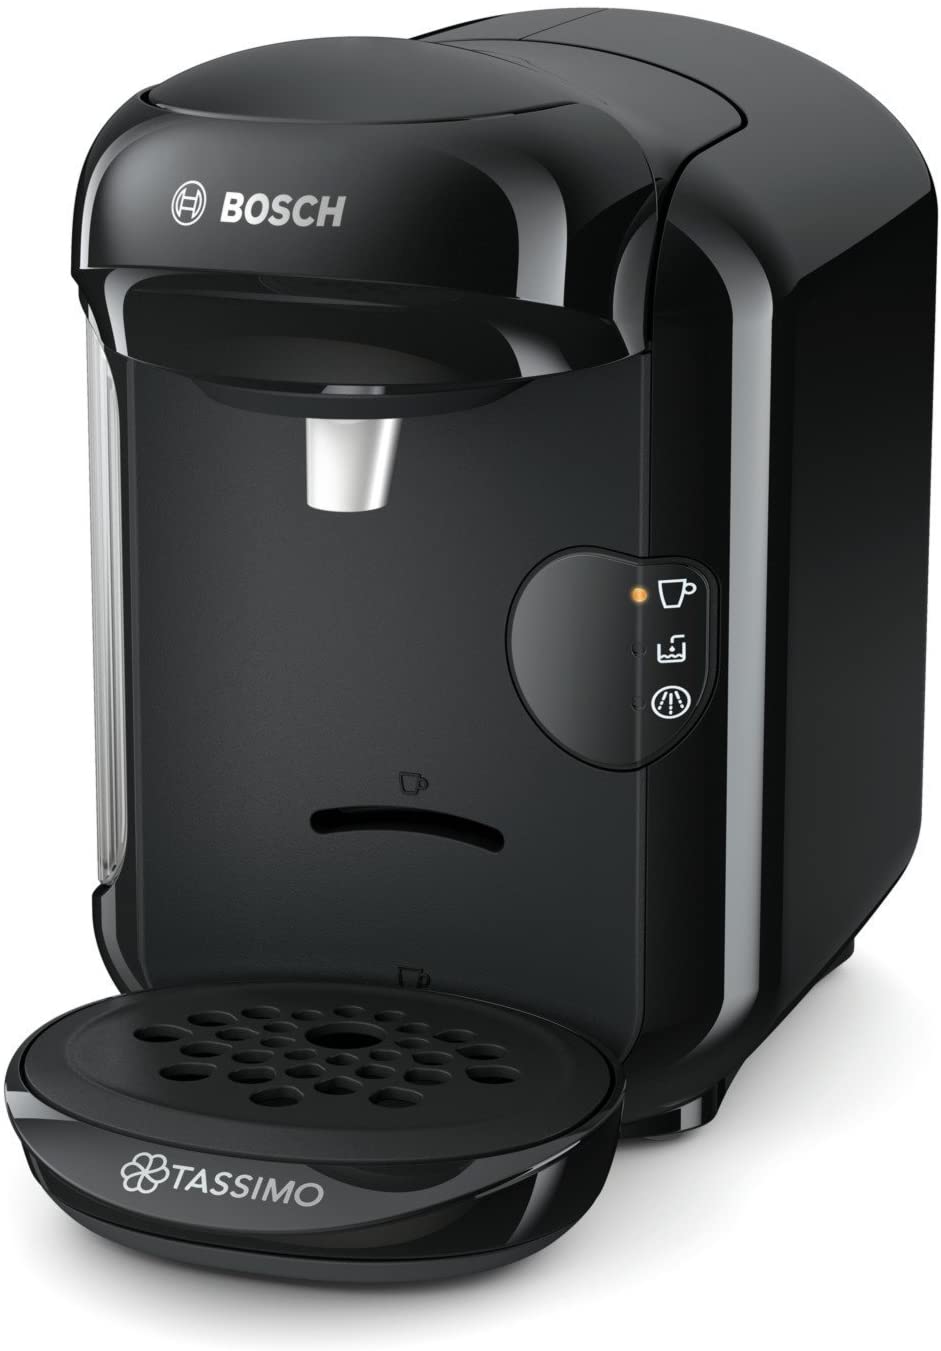 Bosch TAS1402 Tassimo Vivy 2 capsule machine (1300 watts, over 40 drinks, fully automatic, easy preparation, space-saving, 0.7 L container) black